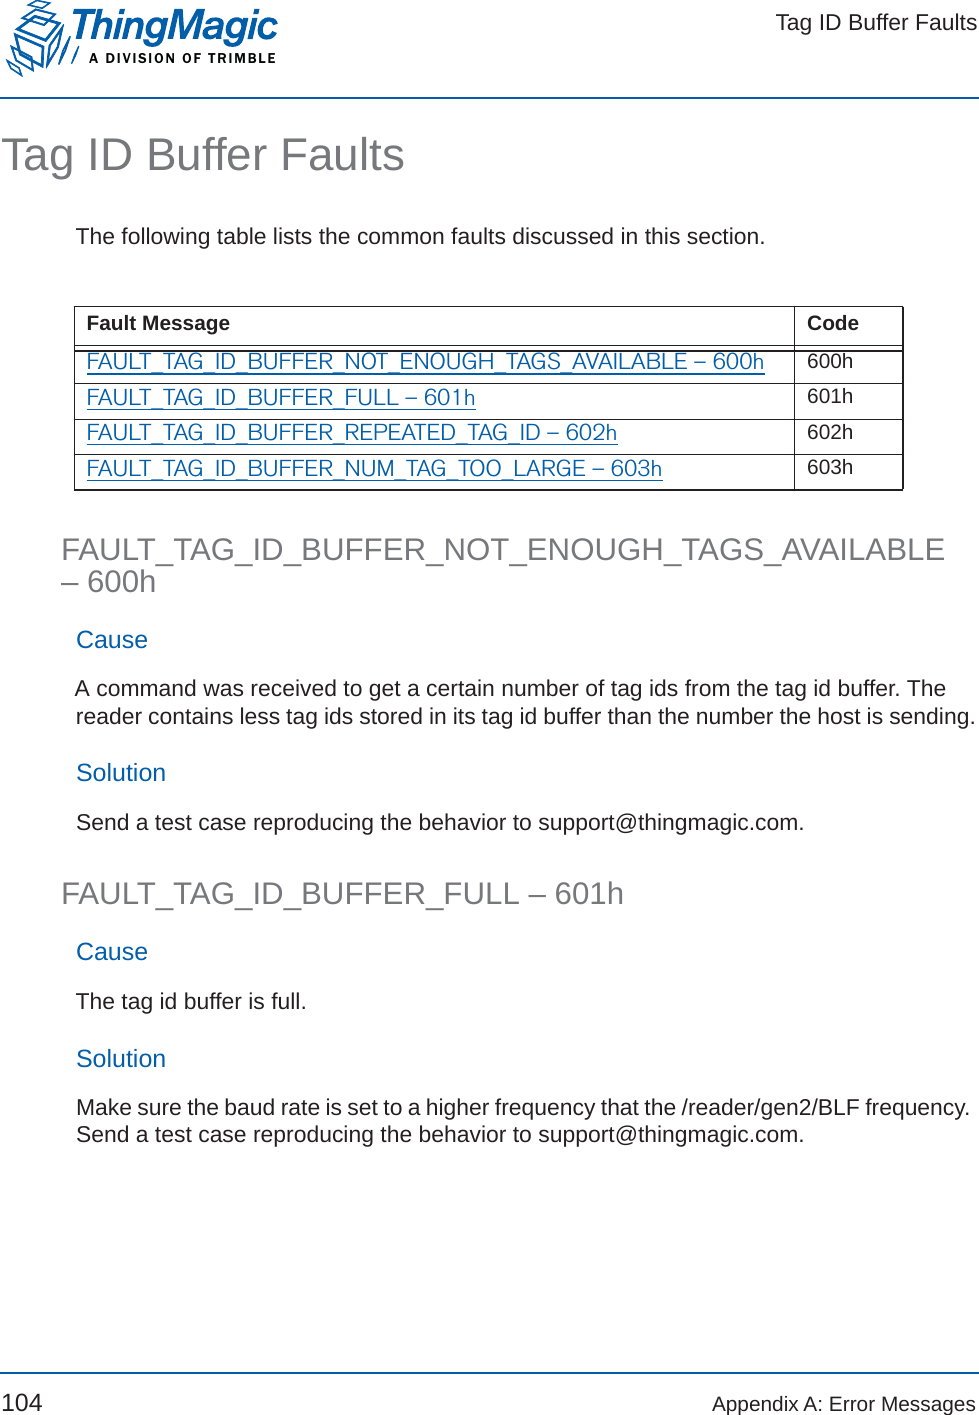 Tag ID Buffer FaultsA DIVISION OF TRIMBLE104 Appendix A: Error MessagesTag ID Buffer FaultsThe following table lists the common faults discussed in this section.FAULT_TAG_ID_BUFFER_NOT_ENOUGH_TAGS_AVAILABLE – 600hCauseA command was received to get a certain number of tag ids from the tag id buffer. The reader contains less tag ids stored in its tag id buffer than the number the host is sending.SolutionSend a test case reproducing the behavior to support@thingmagic.com.FAULT_TAG_ID_BUFFER_FULL – 601hCauseThe tag id buffer is full.SolutionMake sure the baud rate is set to a higher frequency that the /reader/gen2/BLF frequency. Send a test case reproducing the behavior to support@thingmagic.com.Fault Message CodeFAULT_TAG_ID_BUFFER_NOT_ENOUGH_TAGS_AVAILABLE – 600h 600hFAULT_TAG_ID_BUFFER_FULL – 601h 601hFAULT_TAG_ID_BUFFER_REPEATED_TAG_ID – 602h 602hFAULT_TAG_ID_BUFFER_NUM_TAG_TOO_LARGE – 603h 603h